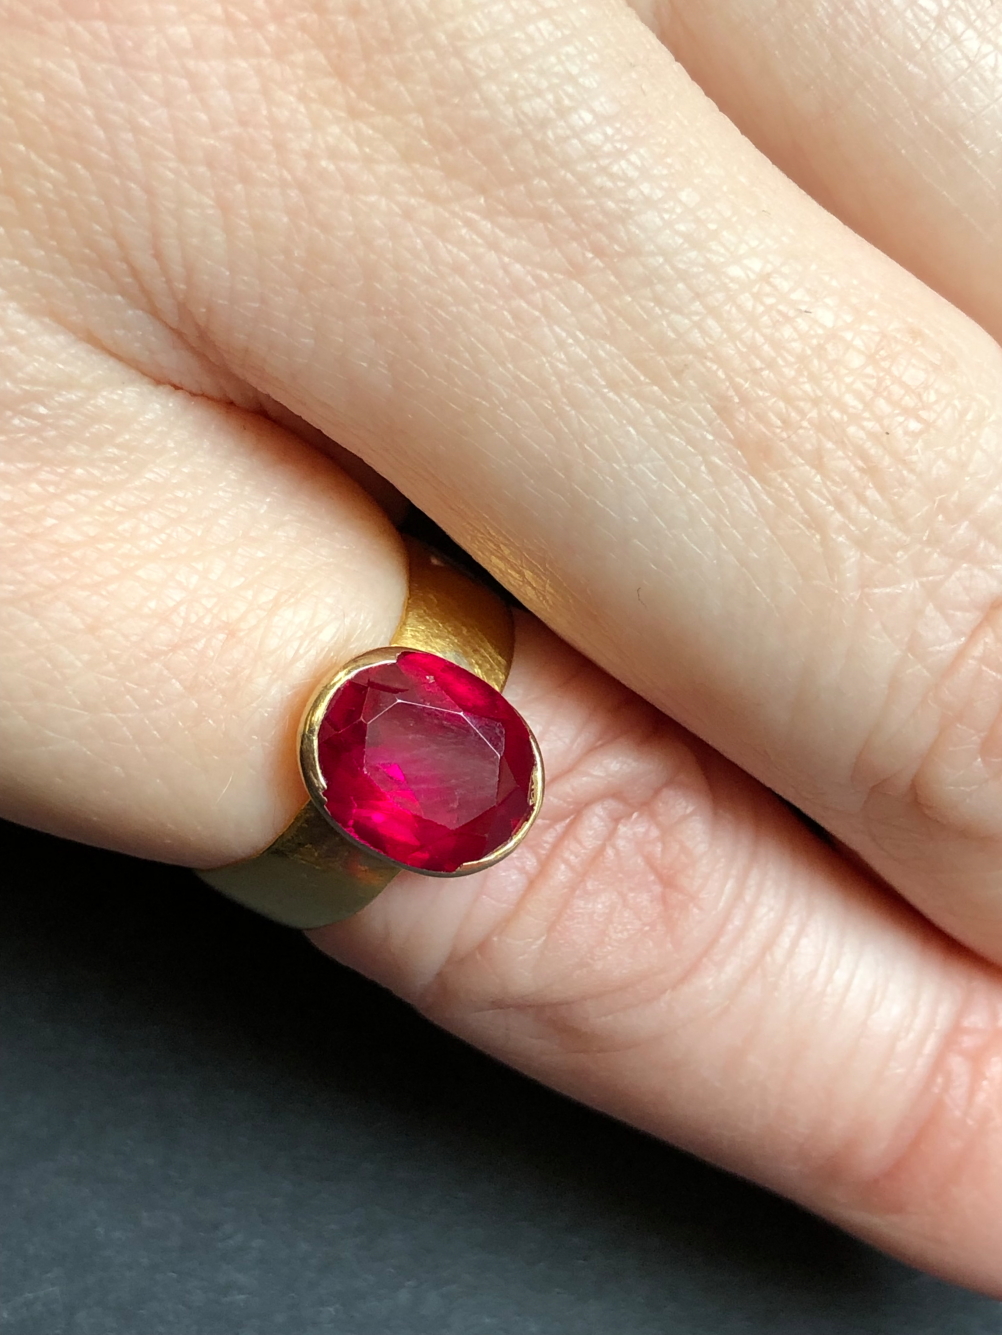 AN ANTIQUE 22ct HALLMARKED GOLD GEMSET RING, WITH A 10ct GOLD SETTING. DATED 1908, BIRMINGHAM. - Image 10 of 10